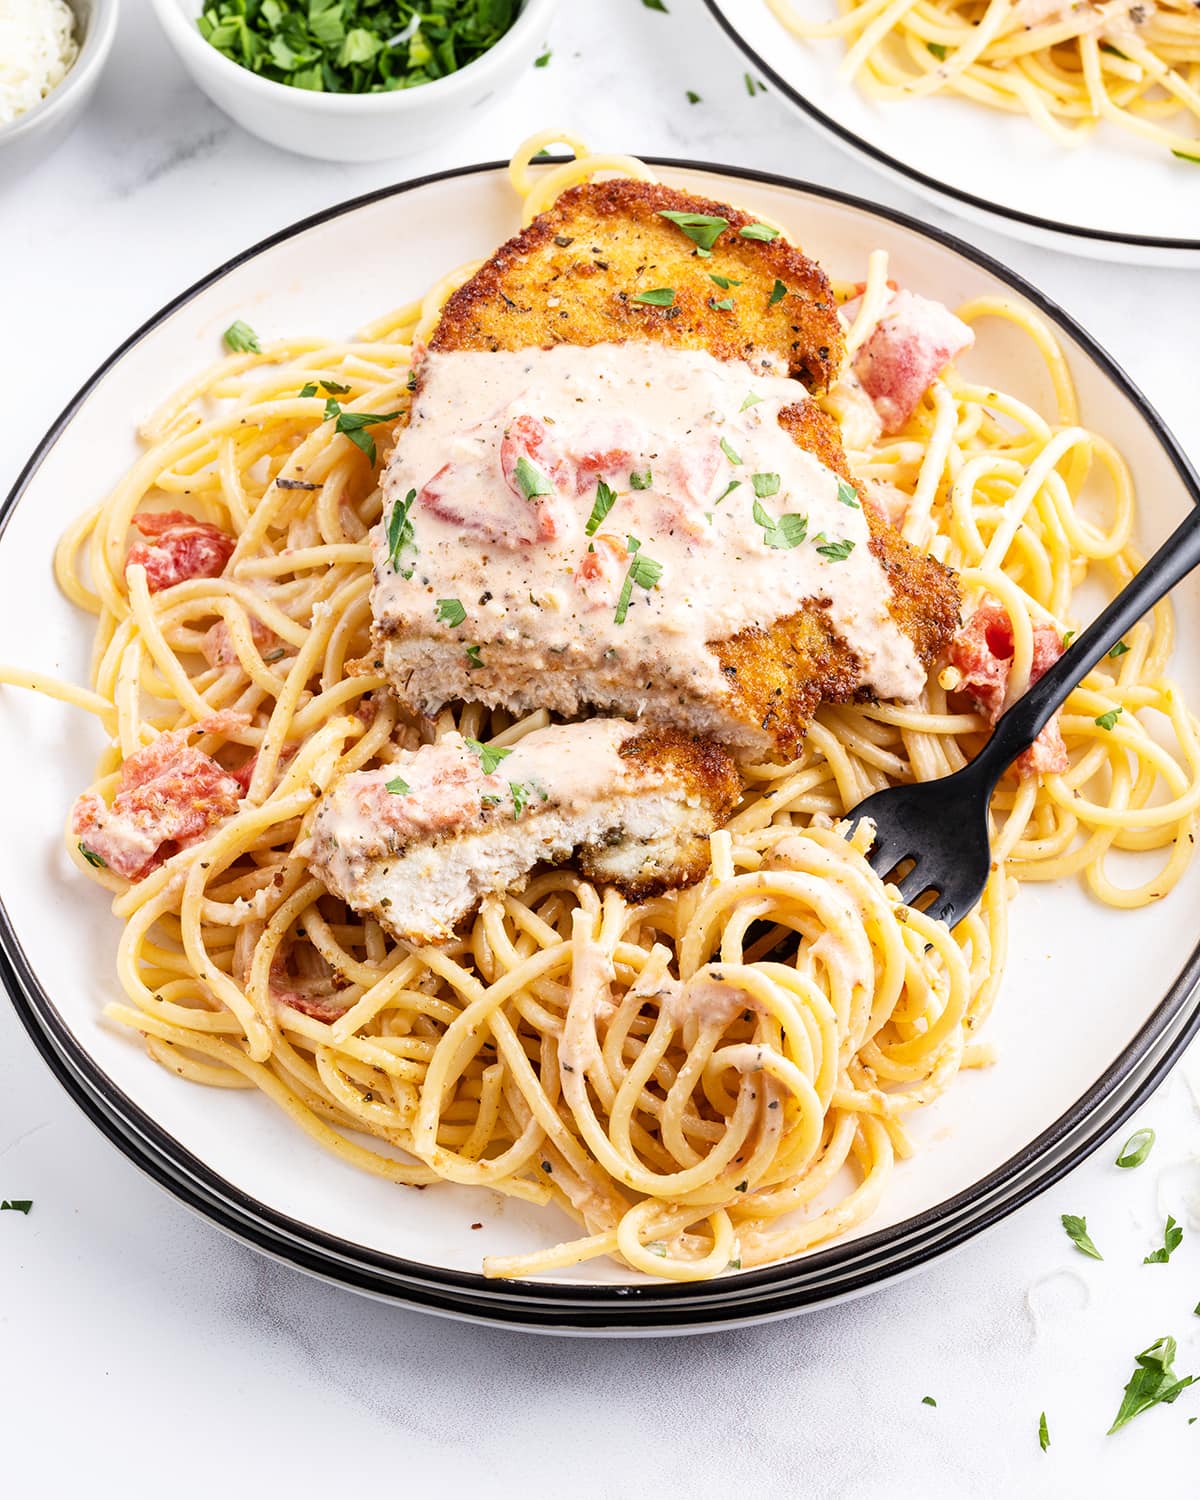 A plate of spaghetti noodles topped with a breaded chicken breast, all topped with a tomato cream sauce. The chicken is cut with a piece in front of the breast.